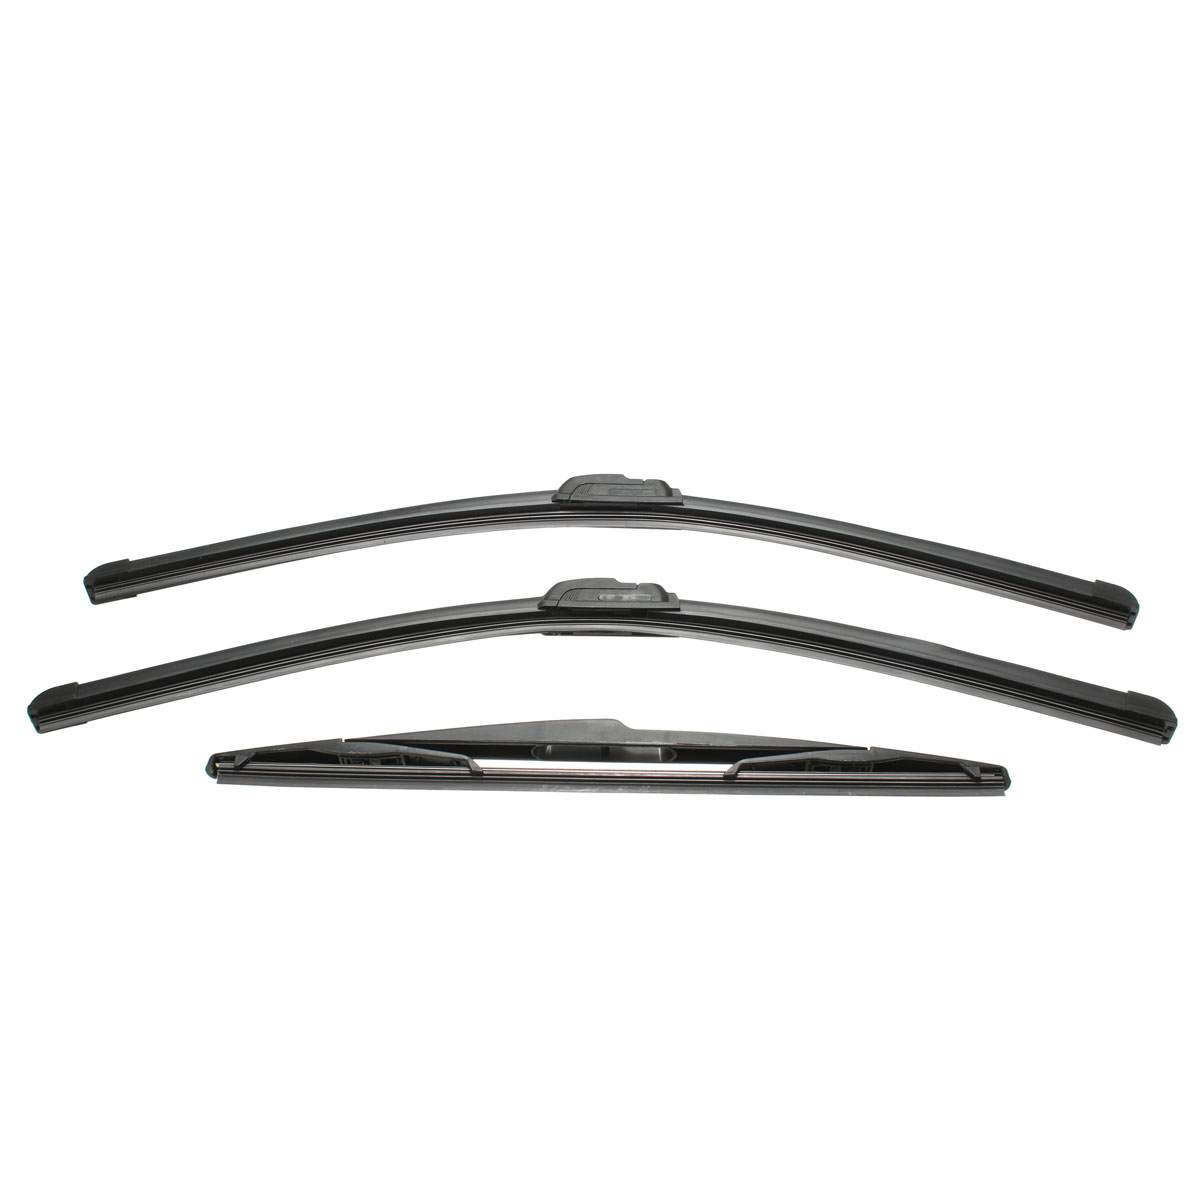 3Pcs Front and Rear Side Windscreen Window Wiper Blades for Peugeot 206 98-10